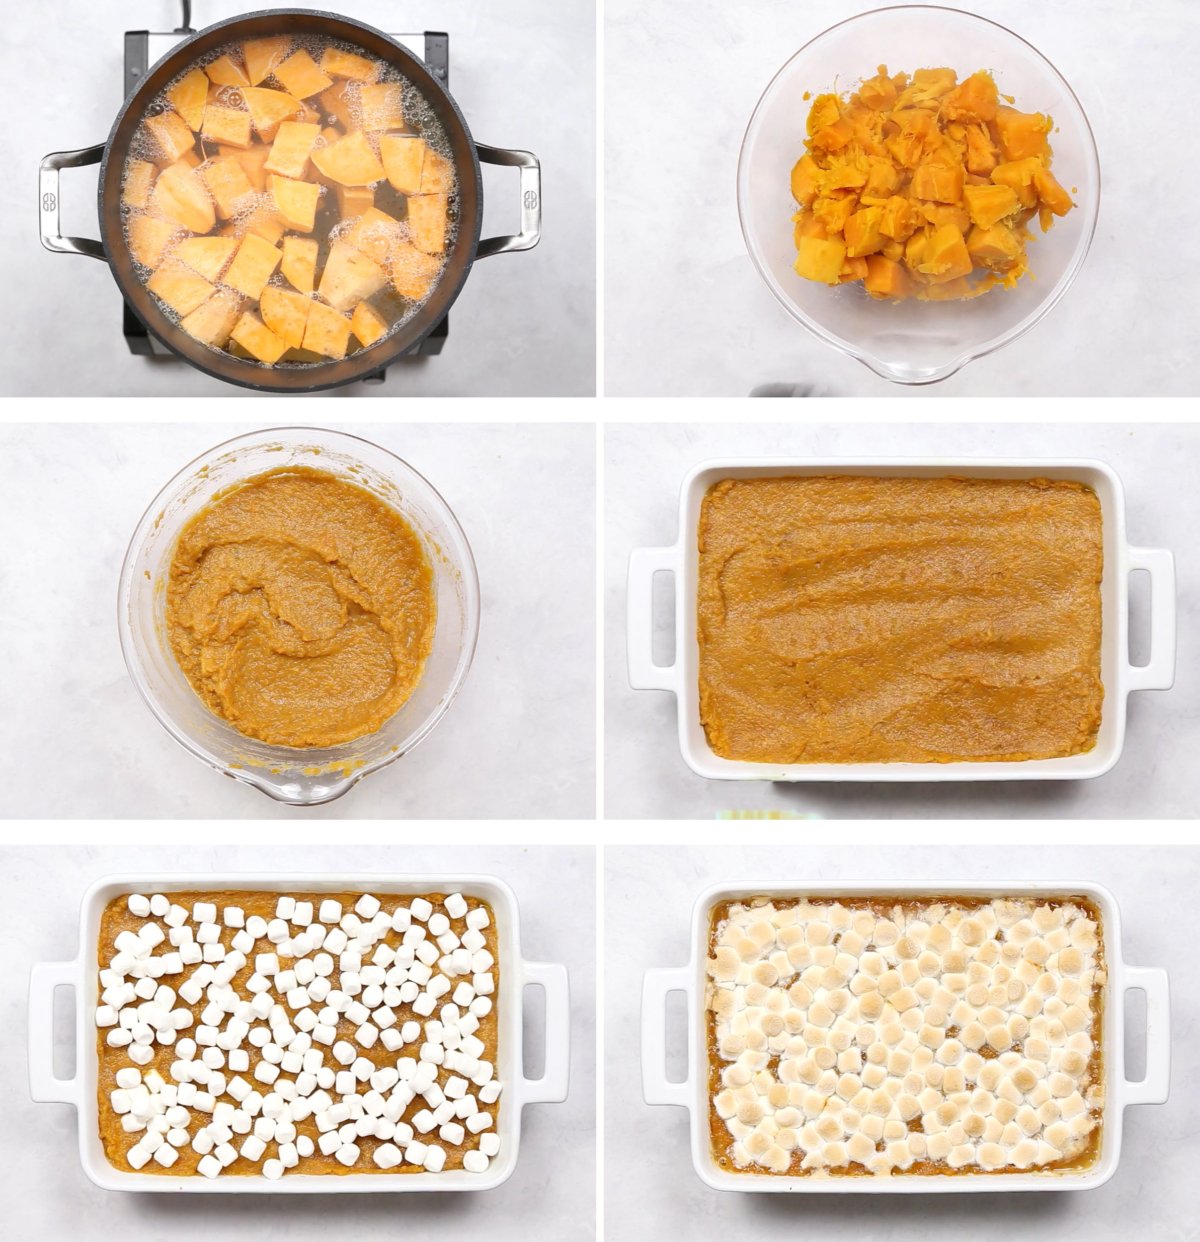 Images showing the process of making sweet potato casserole.